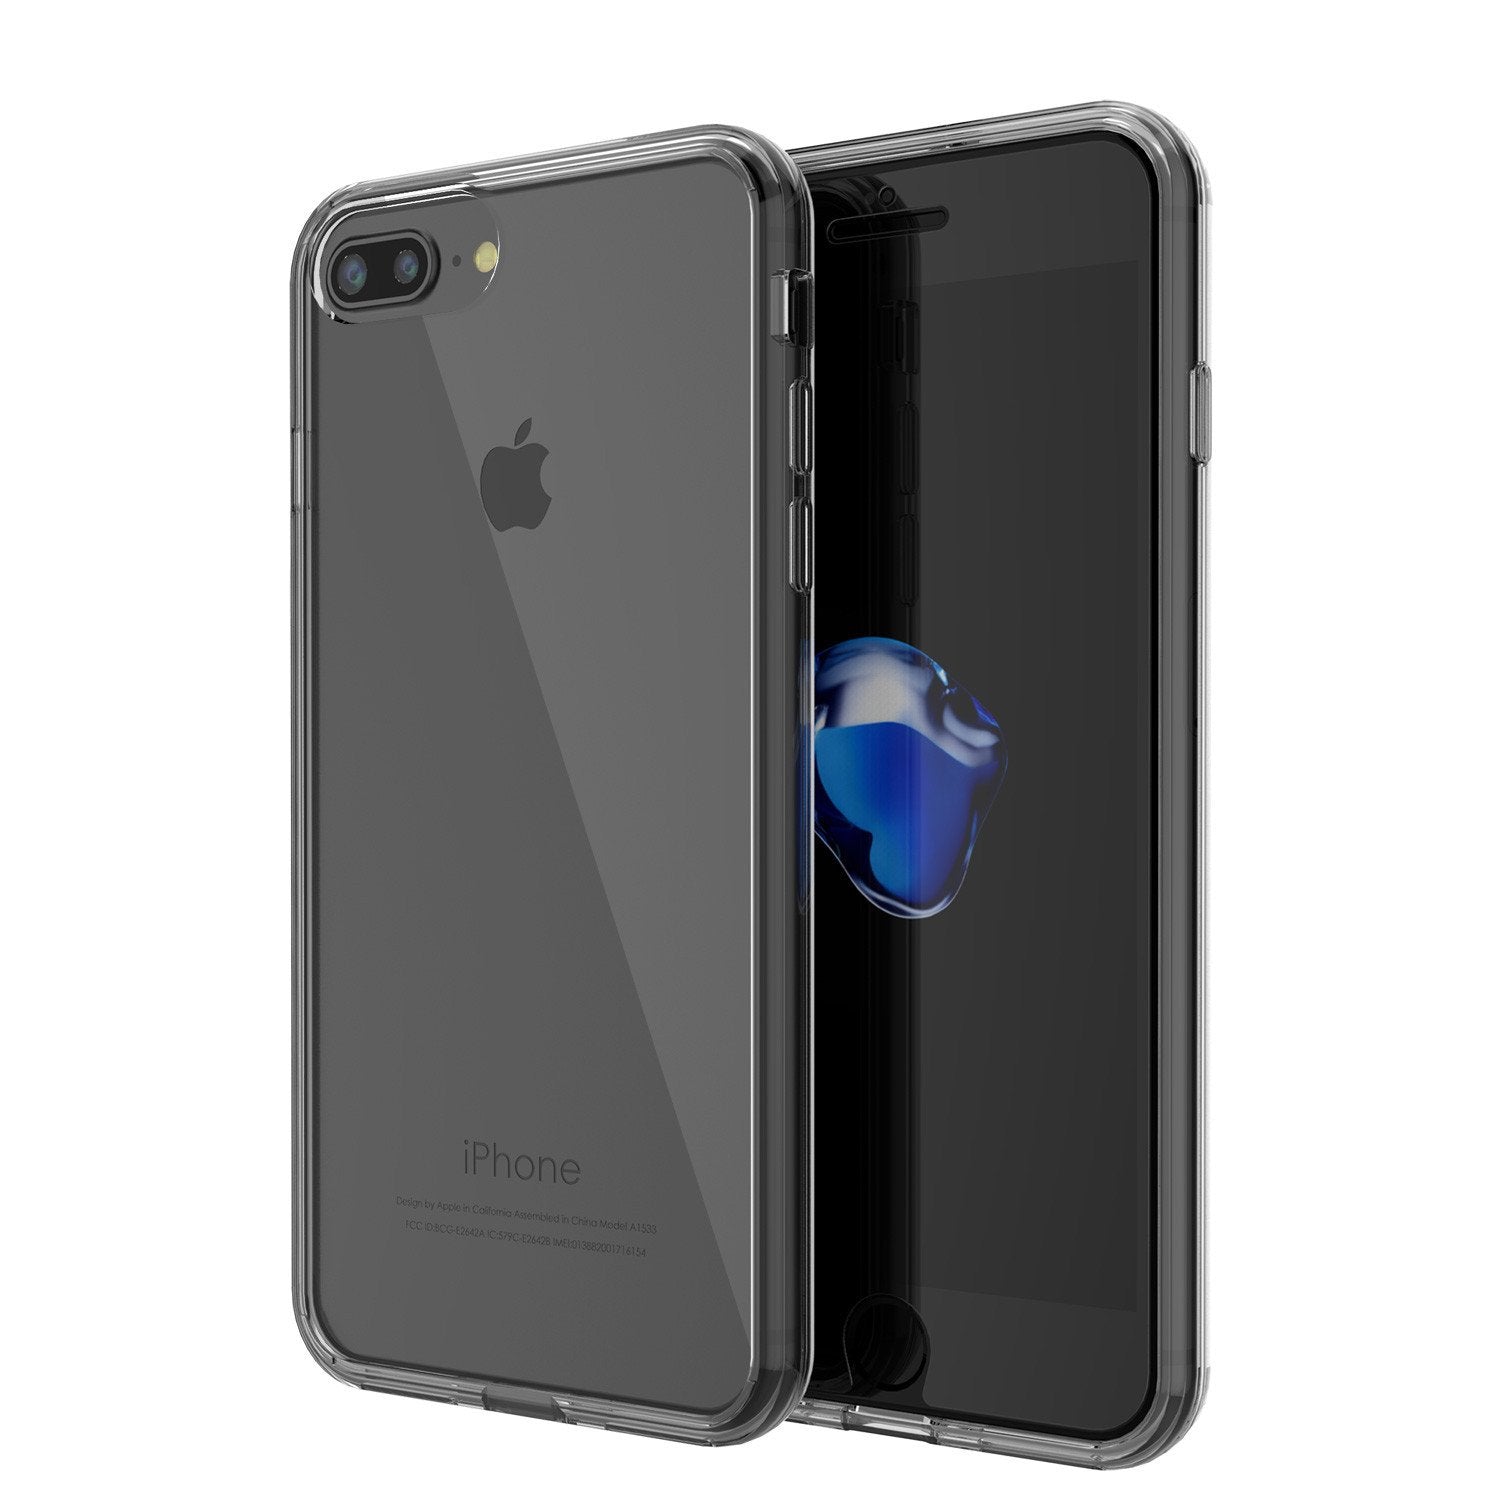 iPhone 7+ Plus Case Punkcase® LUCID 2.0 Crystal Black Series w/ SHIELD Screen Protector | Ultra Fit